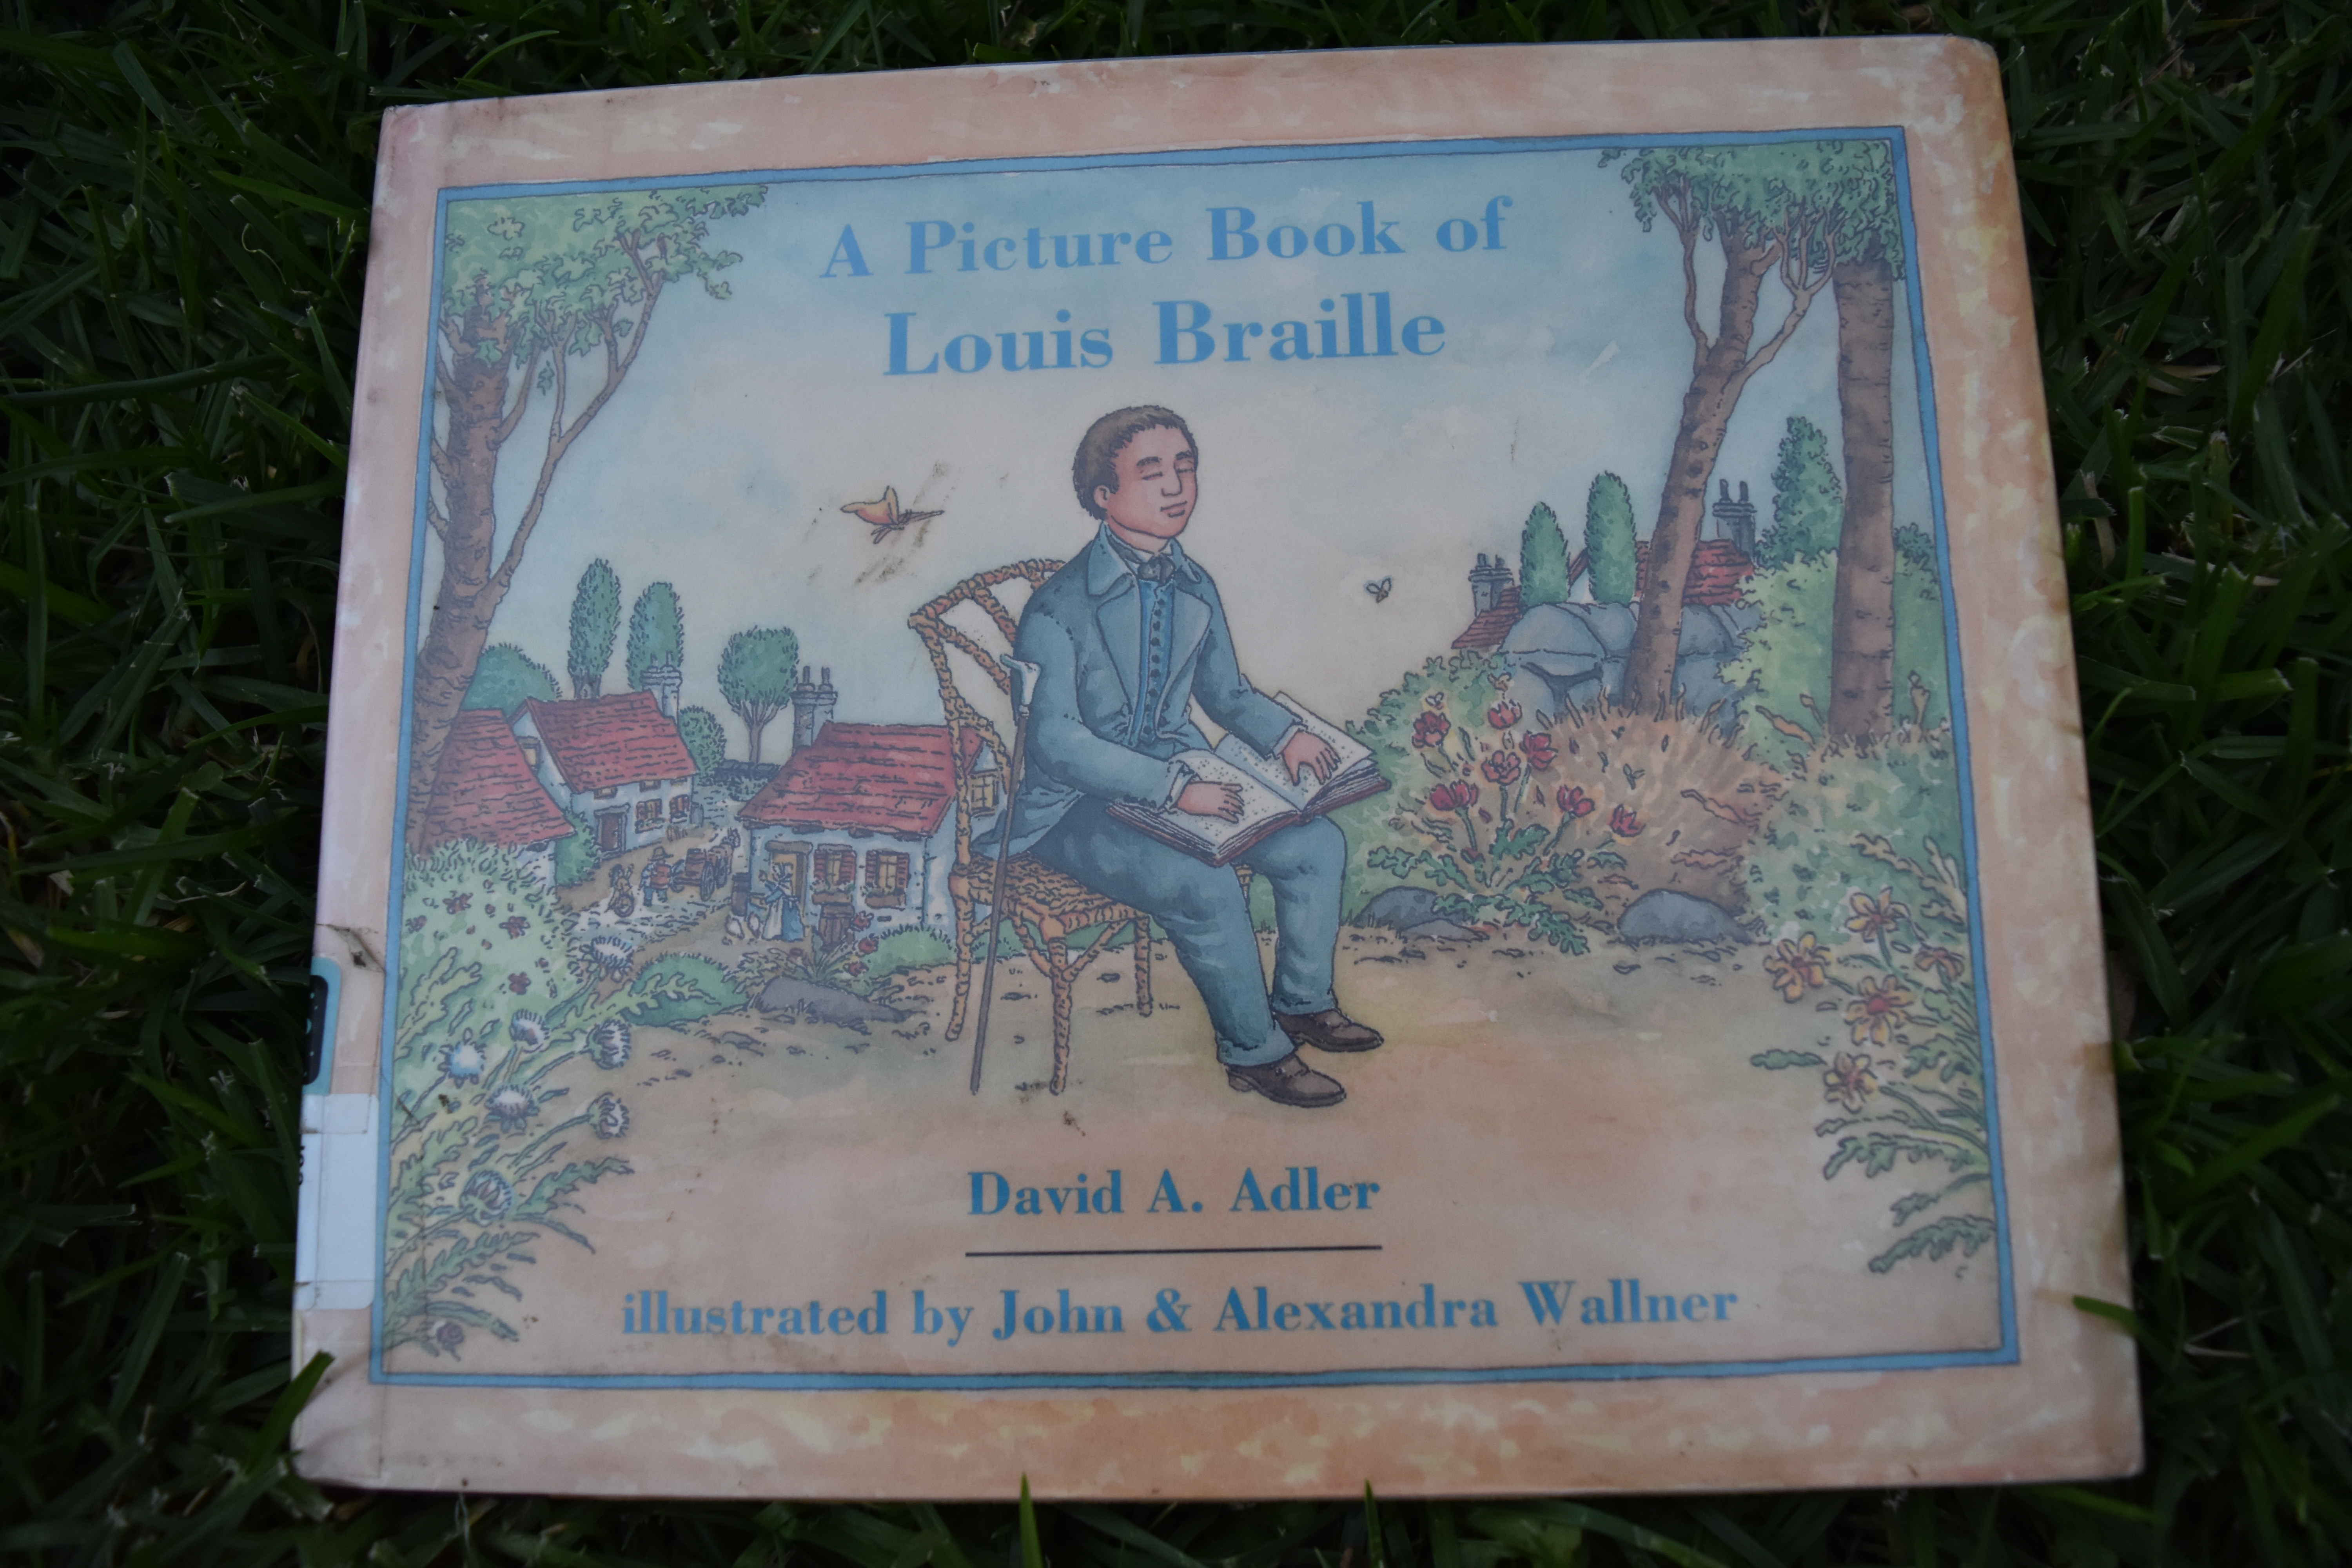 This is the book we read from the library on Louis Braille.